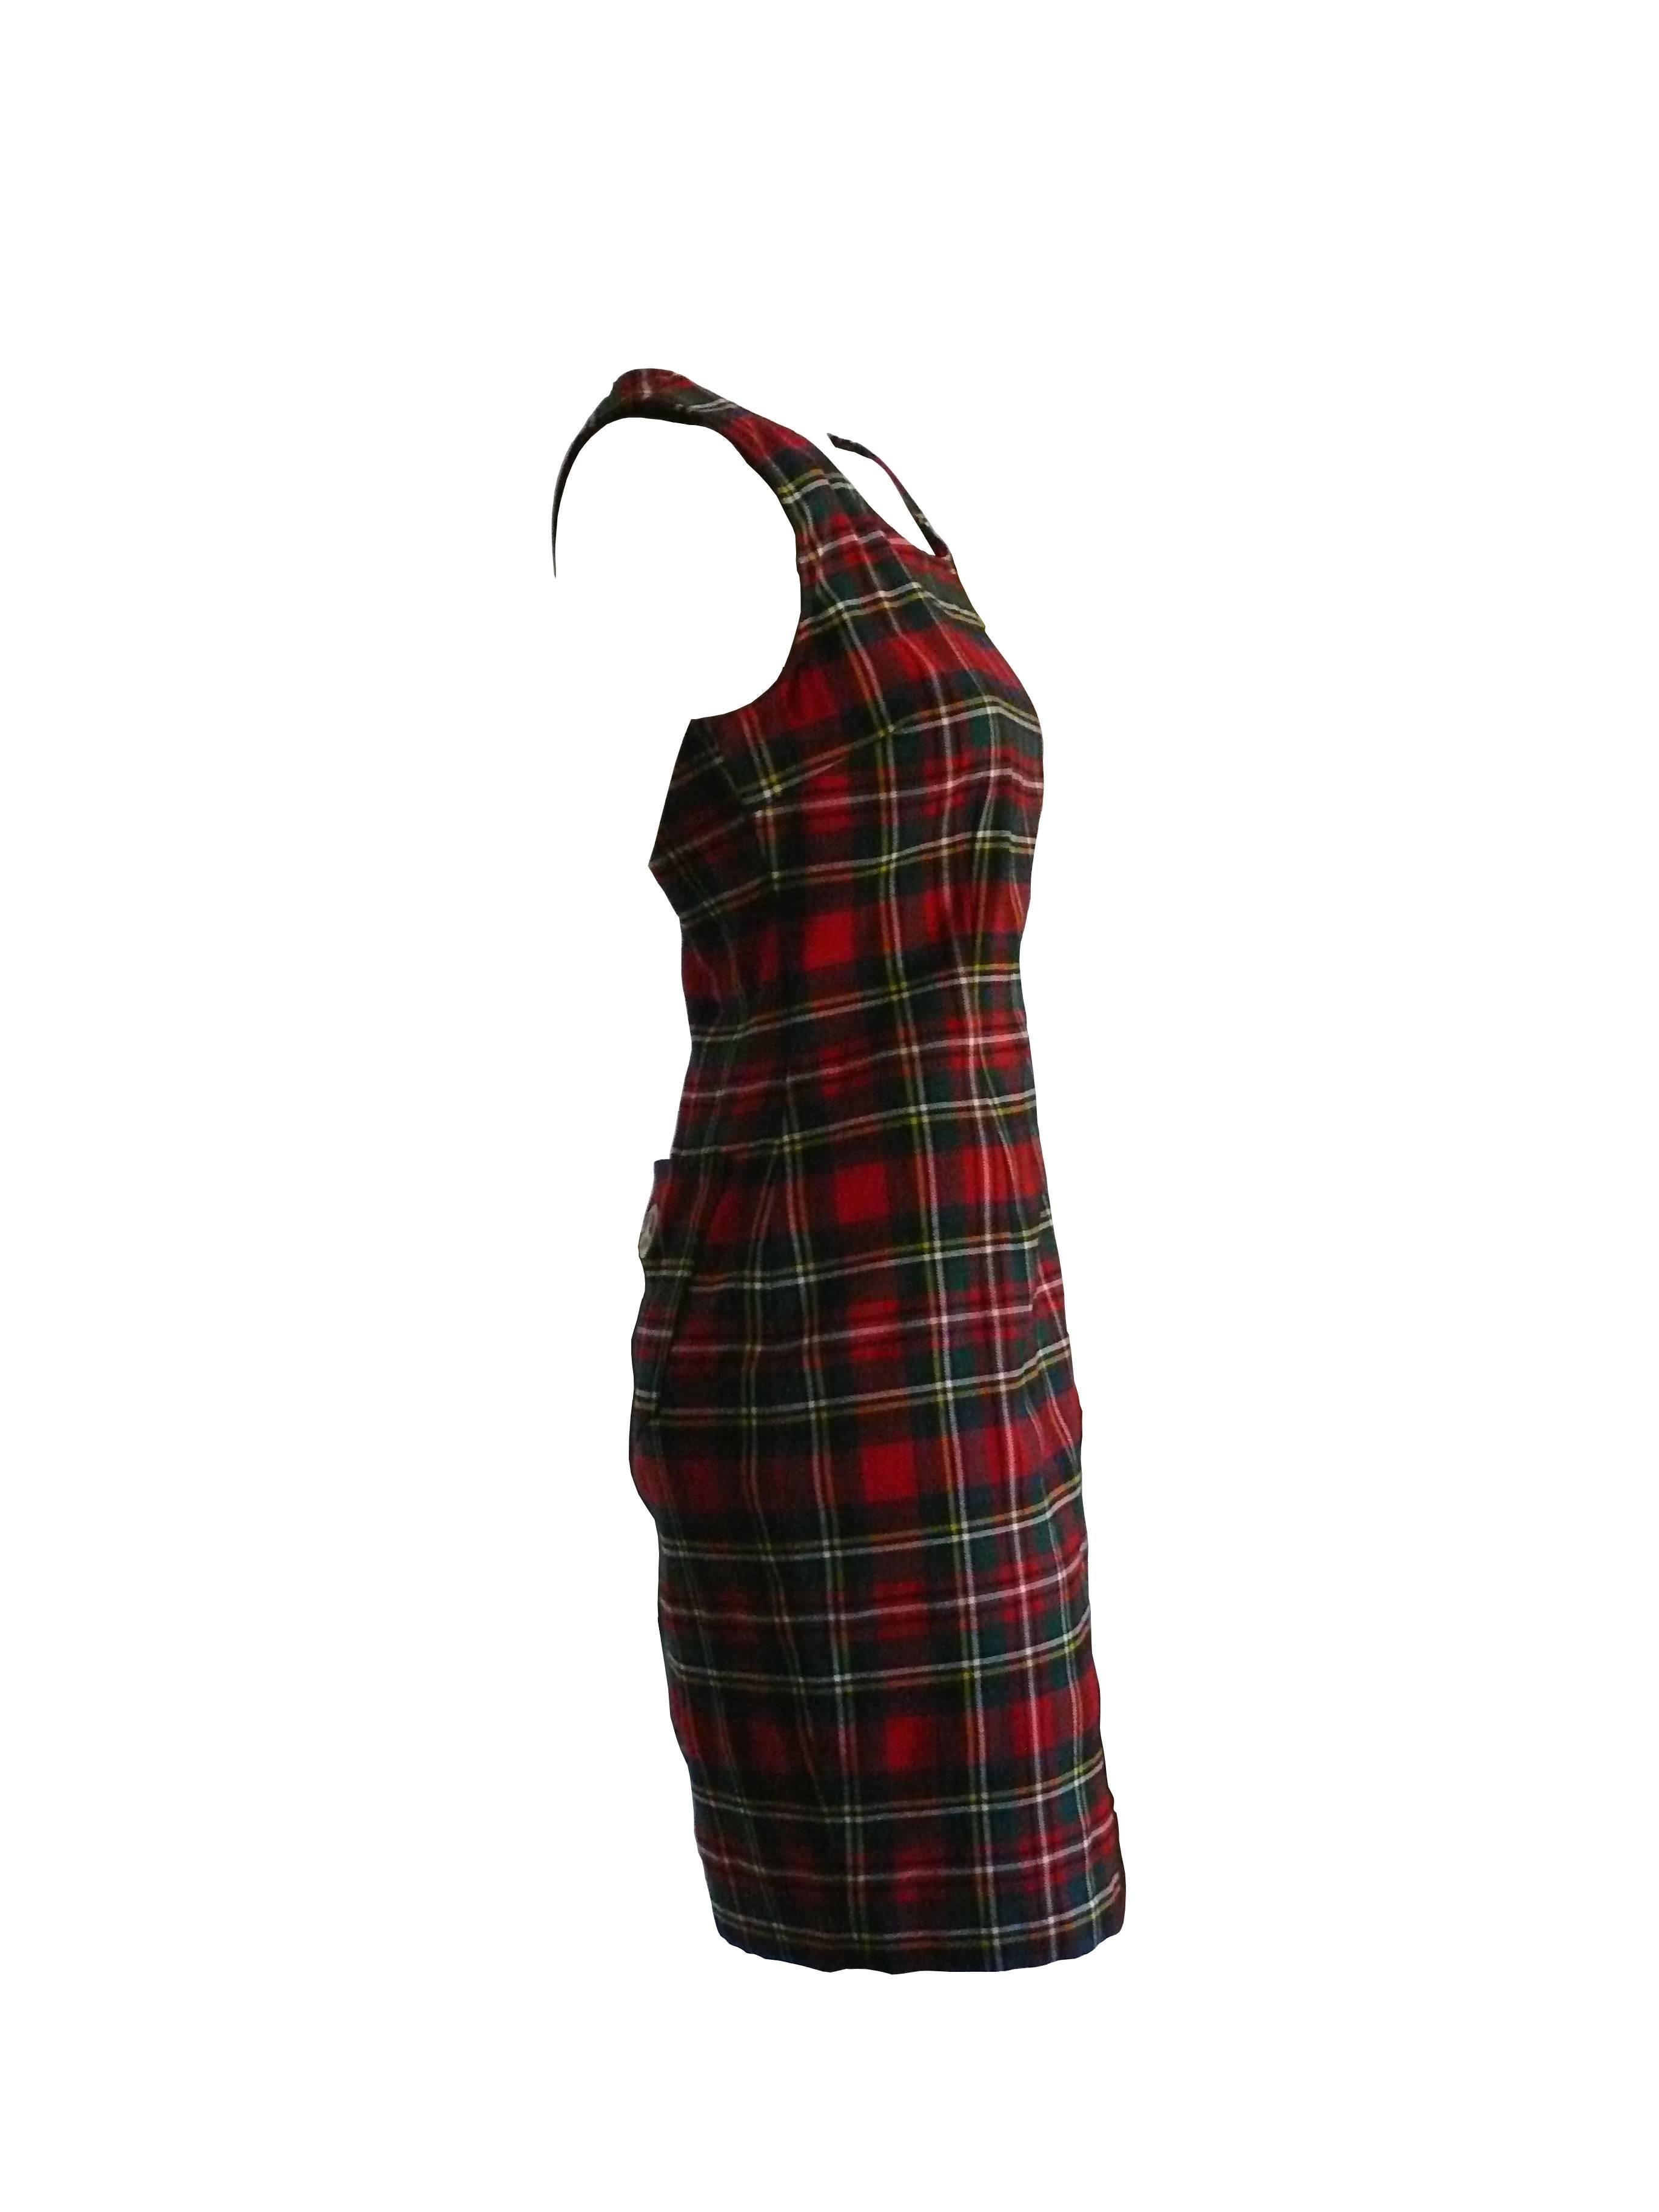 MOSCHINO vintage tartan plaid sheath mini day dress from the 1990s.

This dress is unlined with back pockets and a side zip closure. Peace symbol on one pocket.

Label reads Moschino Jeans Made in Italy.

Color: red / green / blue / yellow /